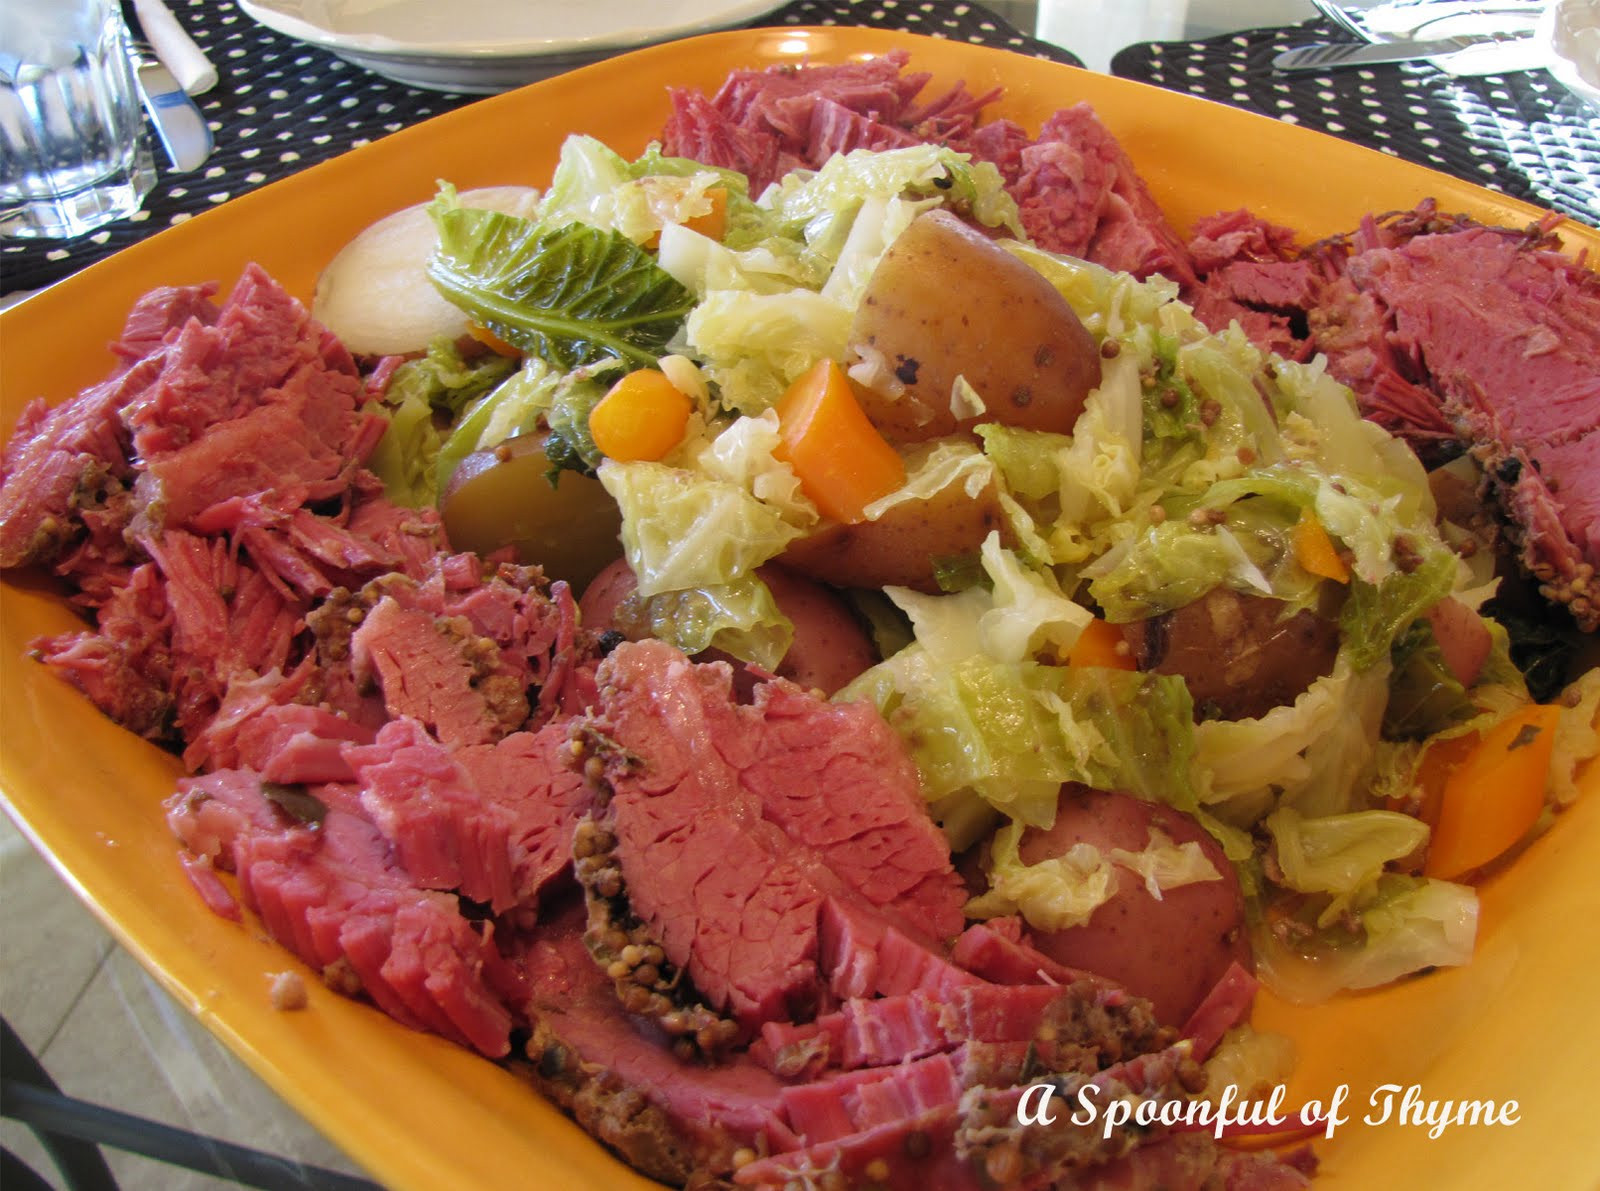 Corned Beef And Cabbage Recipe Oven
 The Thrillbilly Gourmet Corned Beef and Cabbage